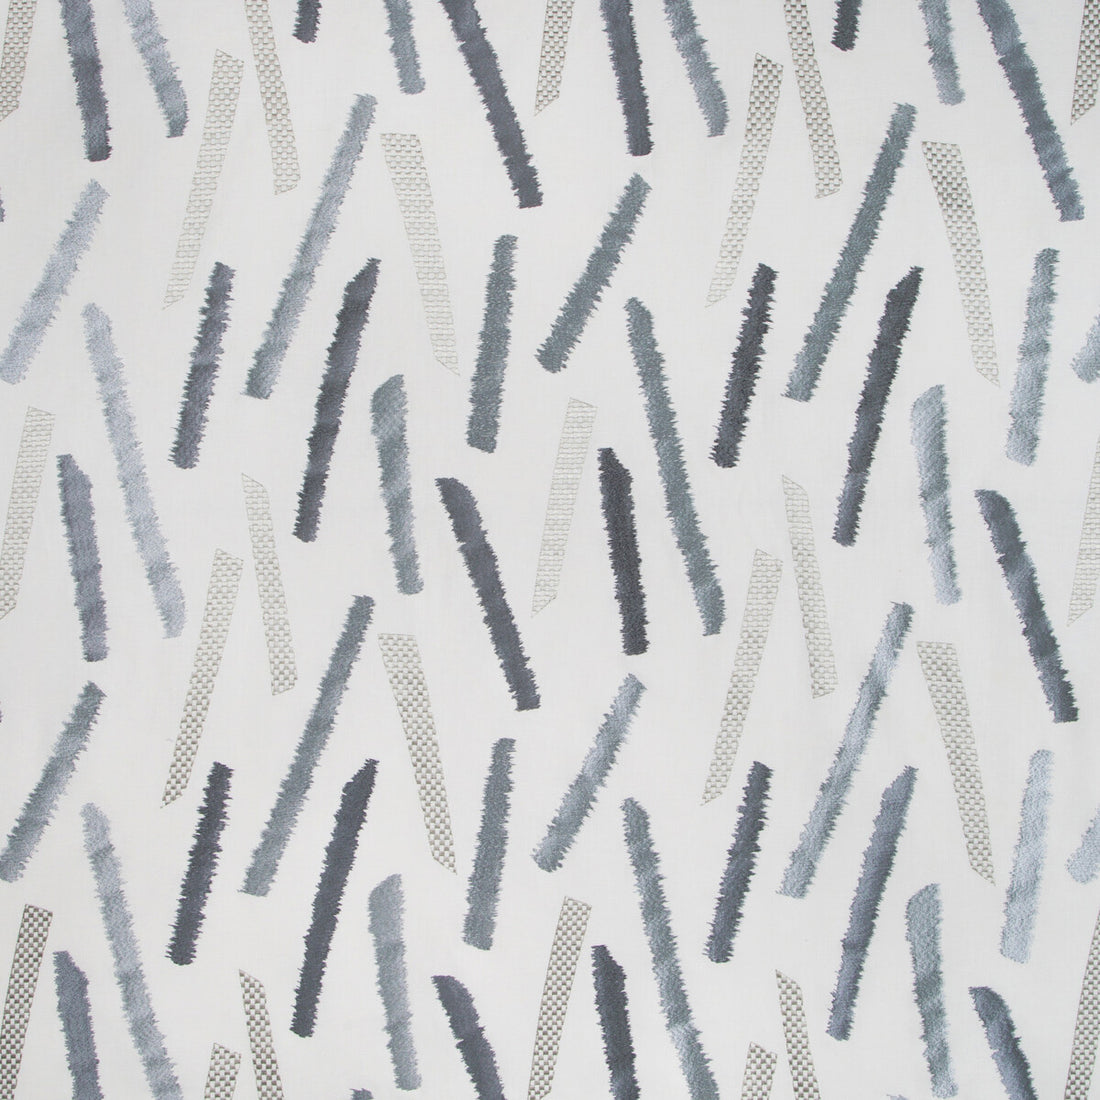 Tramonto fabric in mineral color - pattern 35020.511.0 - by Kravet Basics in the Jeffrey Alan Marks Oceanview collection